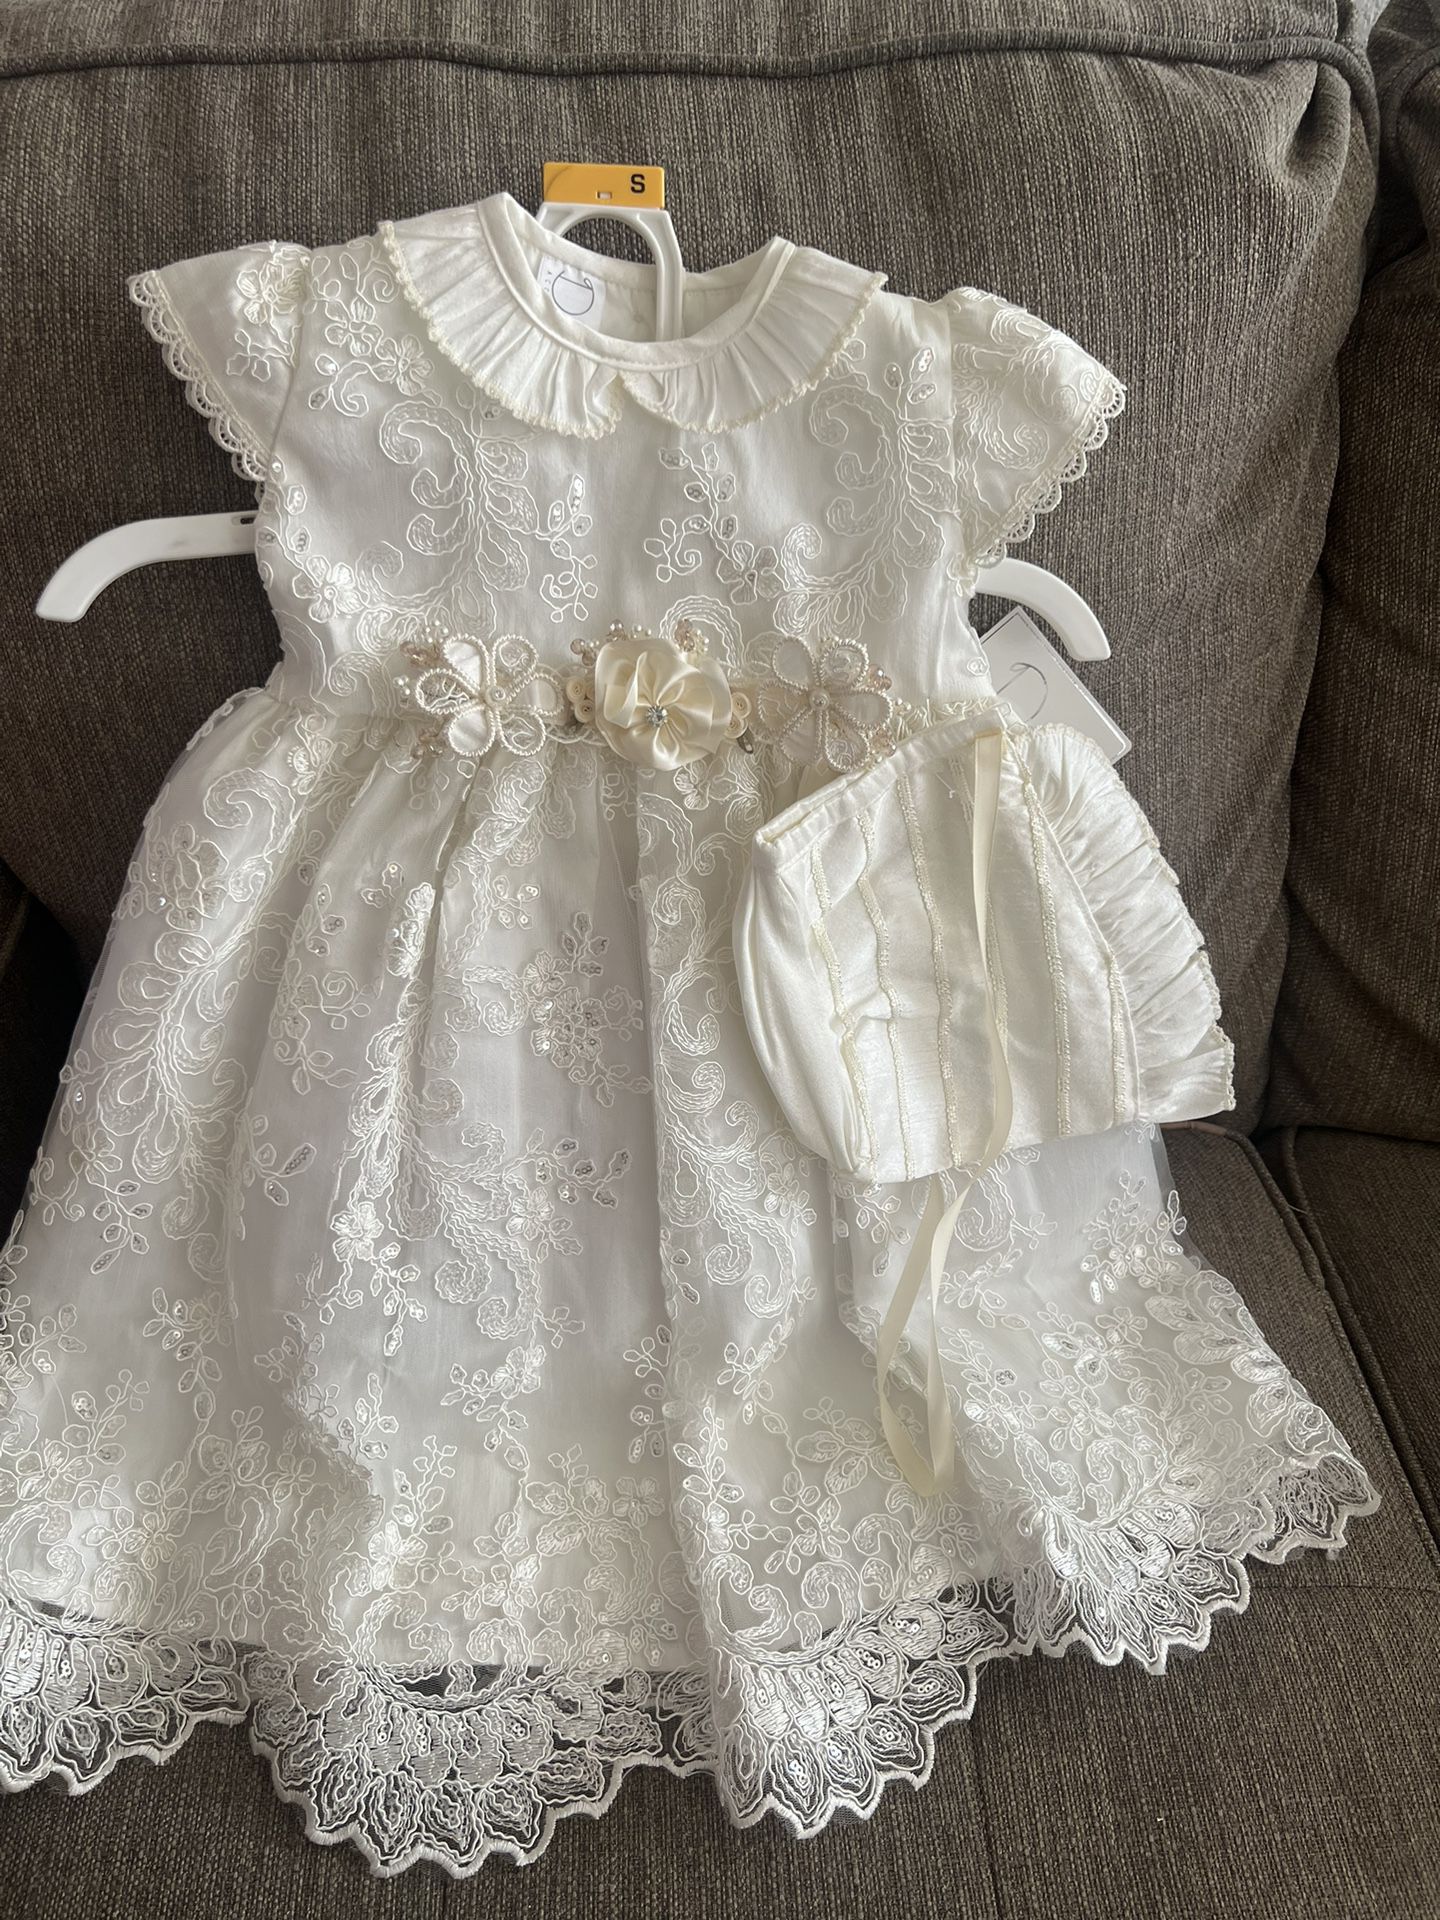 Baptism Dress With Tags Size 2T 